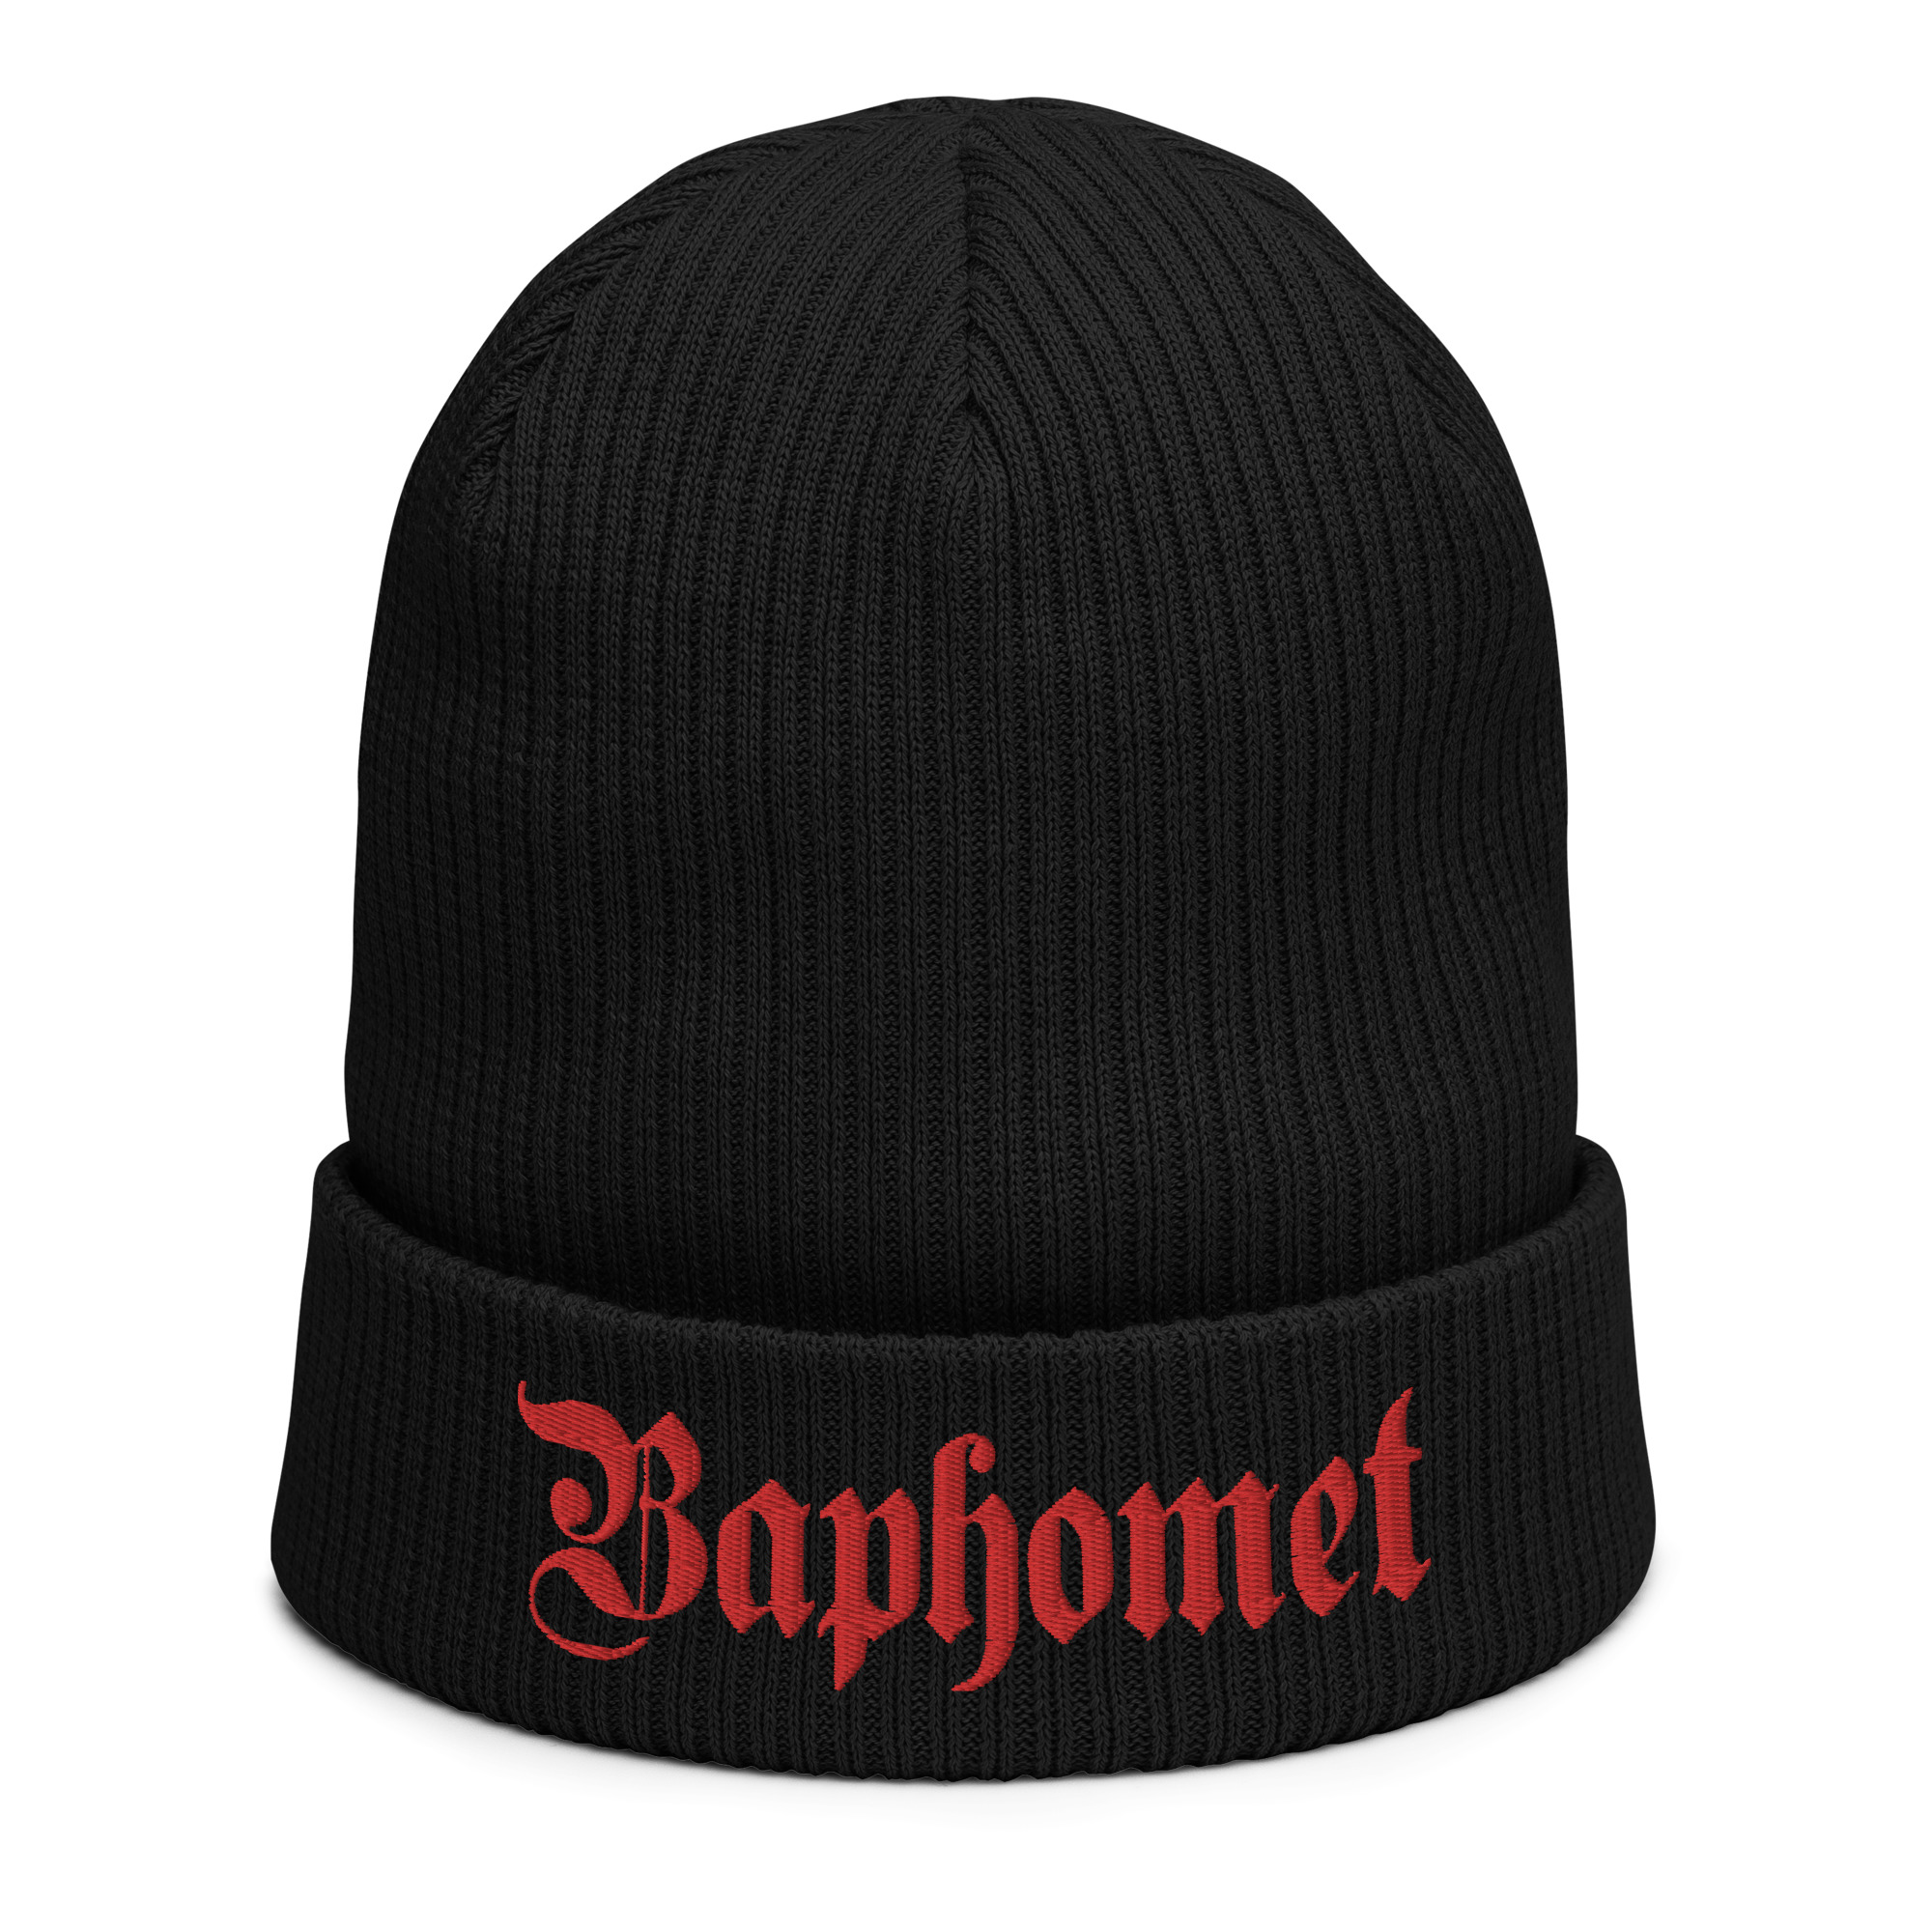 Featured image for “Baphomet - Organic ribbed beanie”